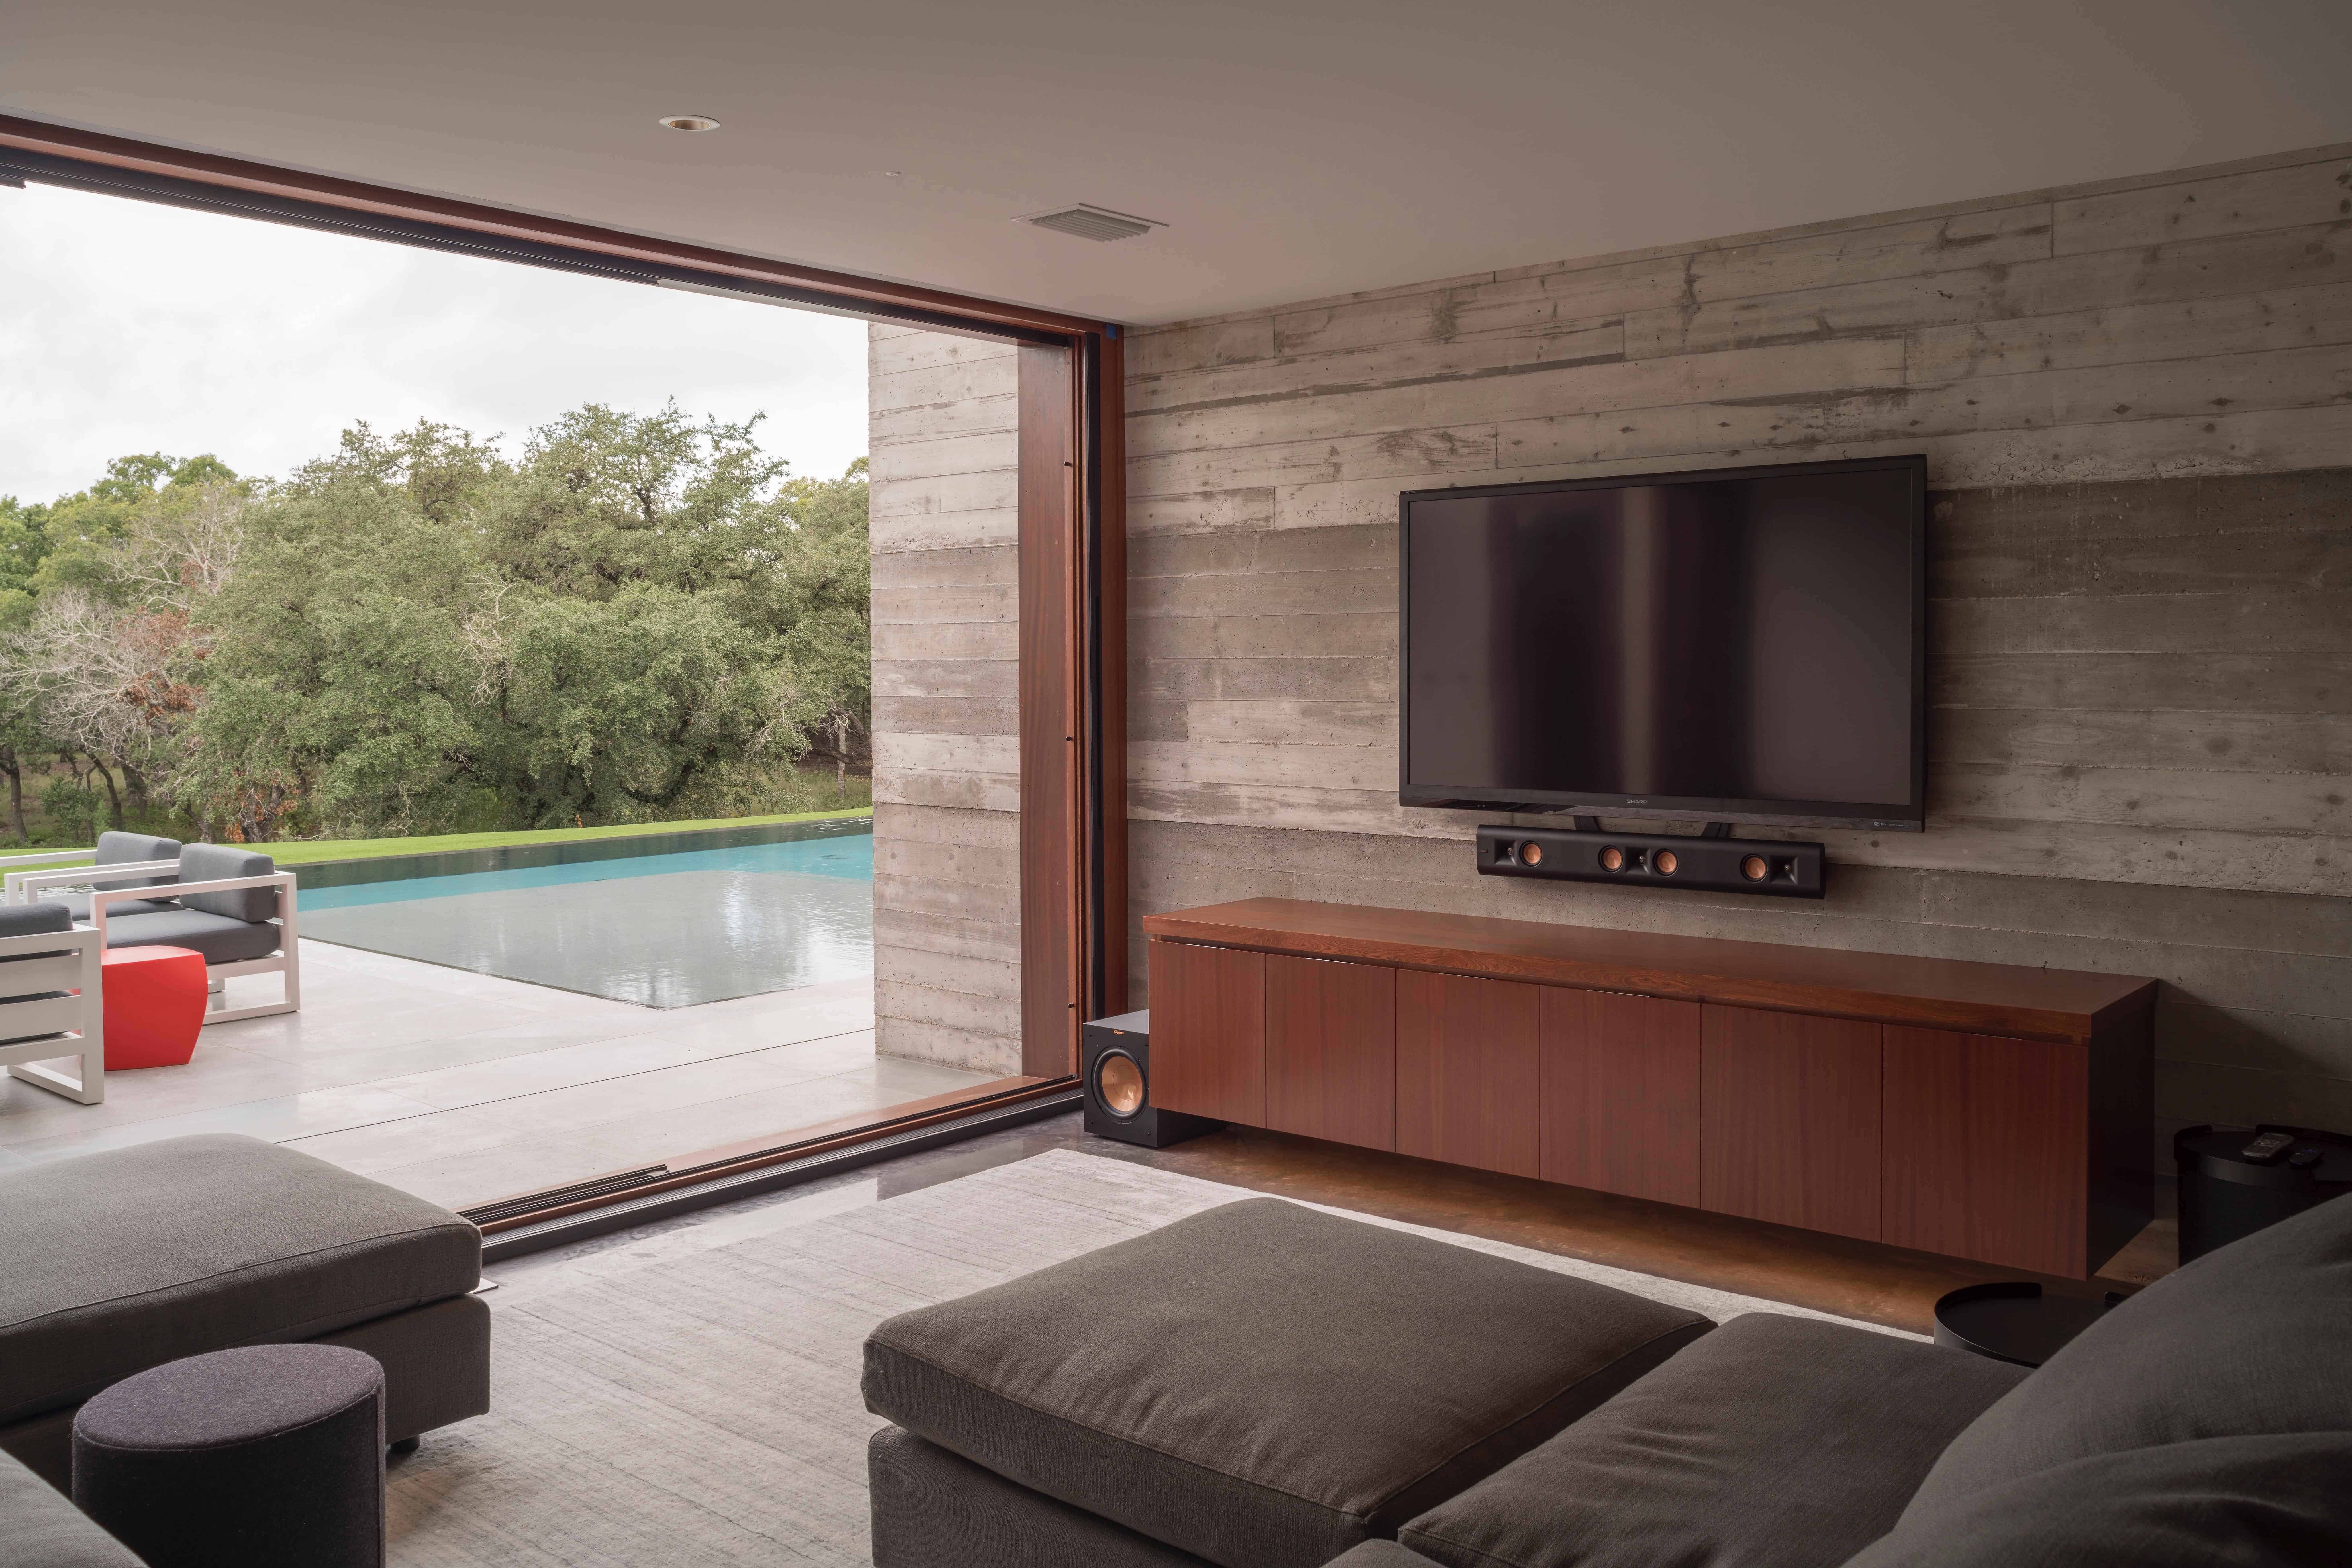 Large Picture Glass Window overlooking modern pool